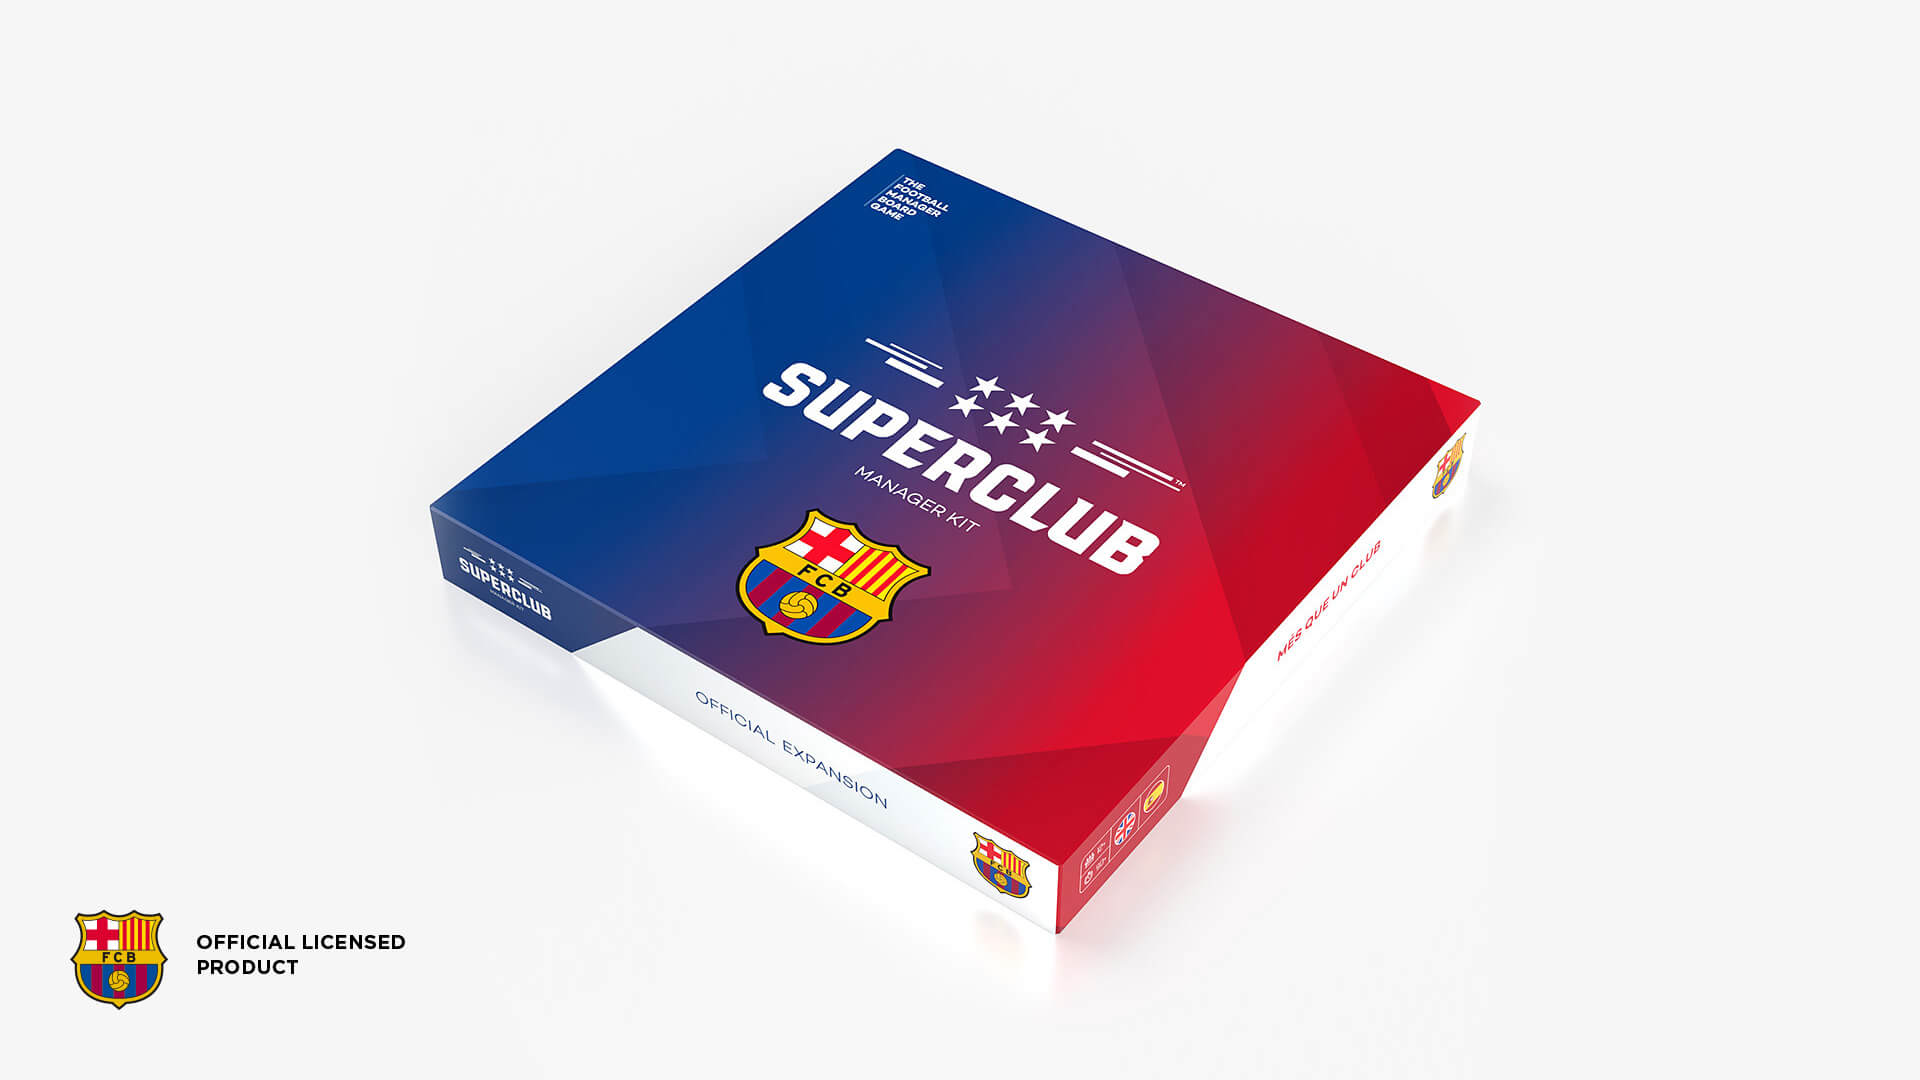 Spanish giants FC Barcelona will join the Superclub family for the 2022/23 season!